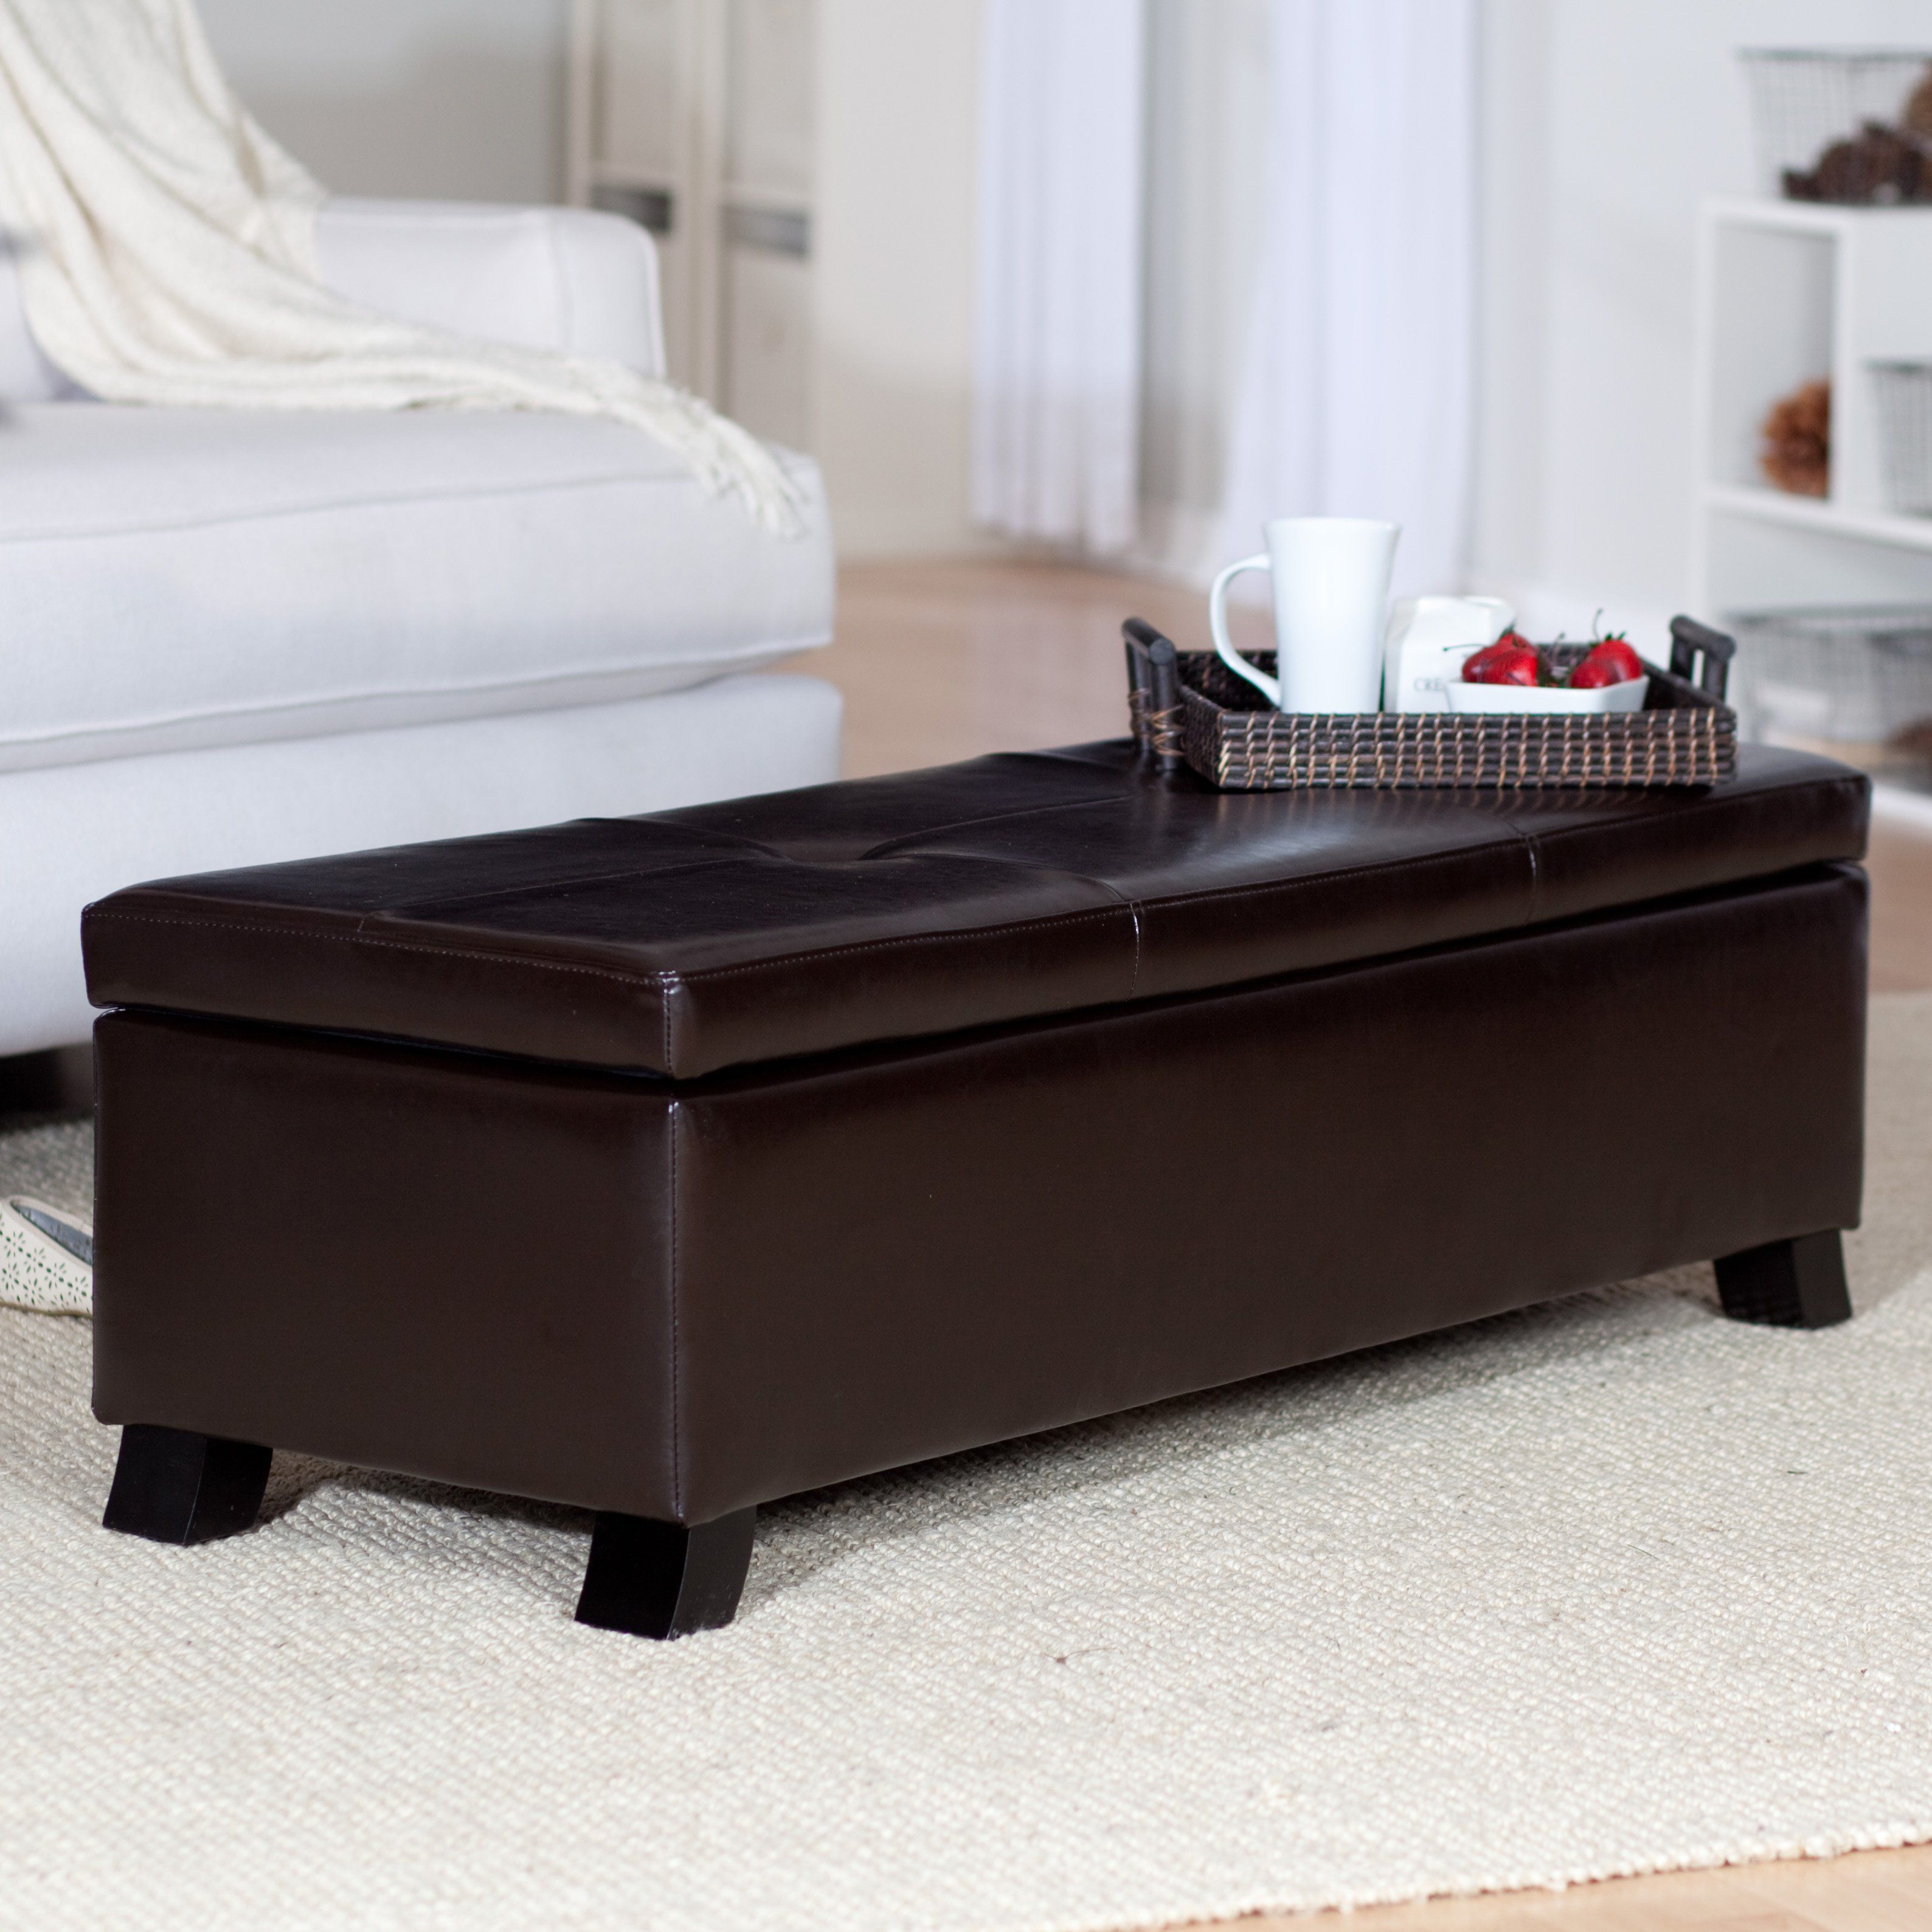 Leather Coffee Table Ottoman With Storage Incredible Glass Top Table Designs For You To Enjoy Your Coffee Contemporary Decor On Table Design Ideas (View 5 of 9)